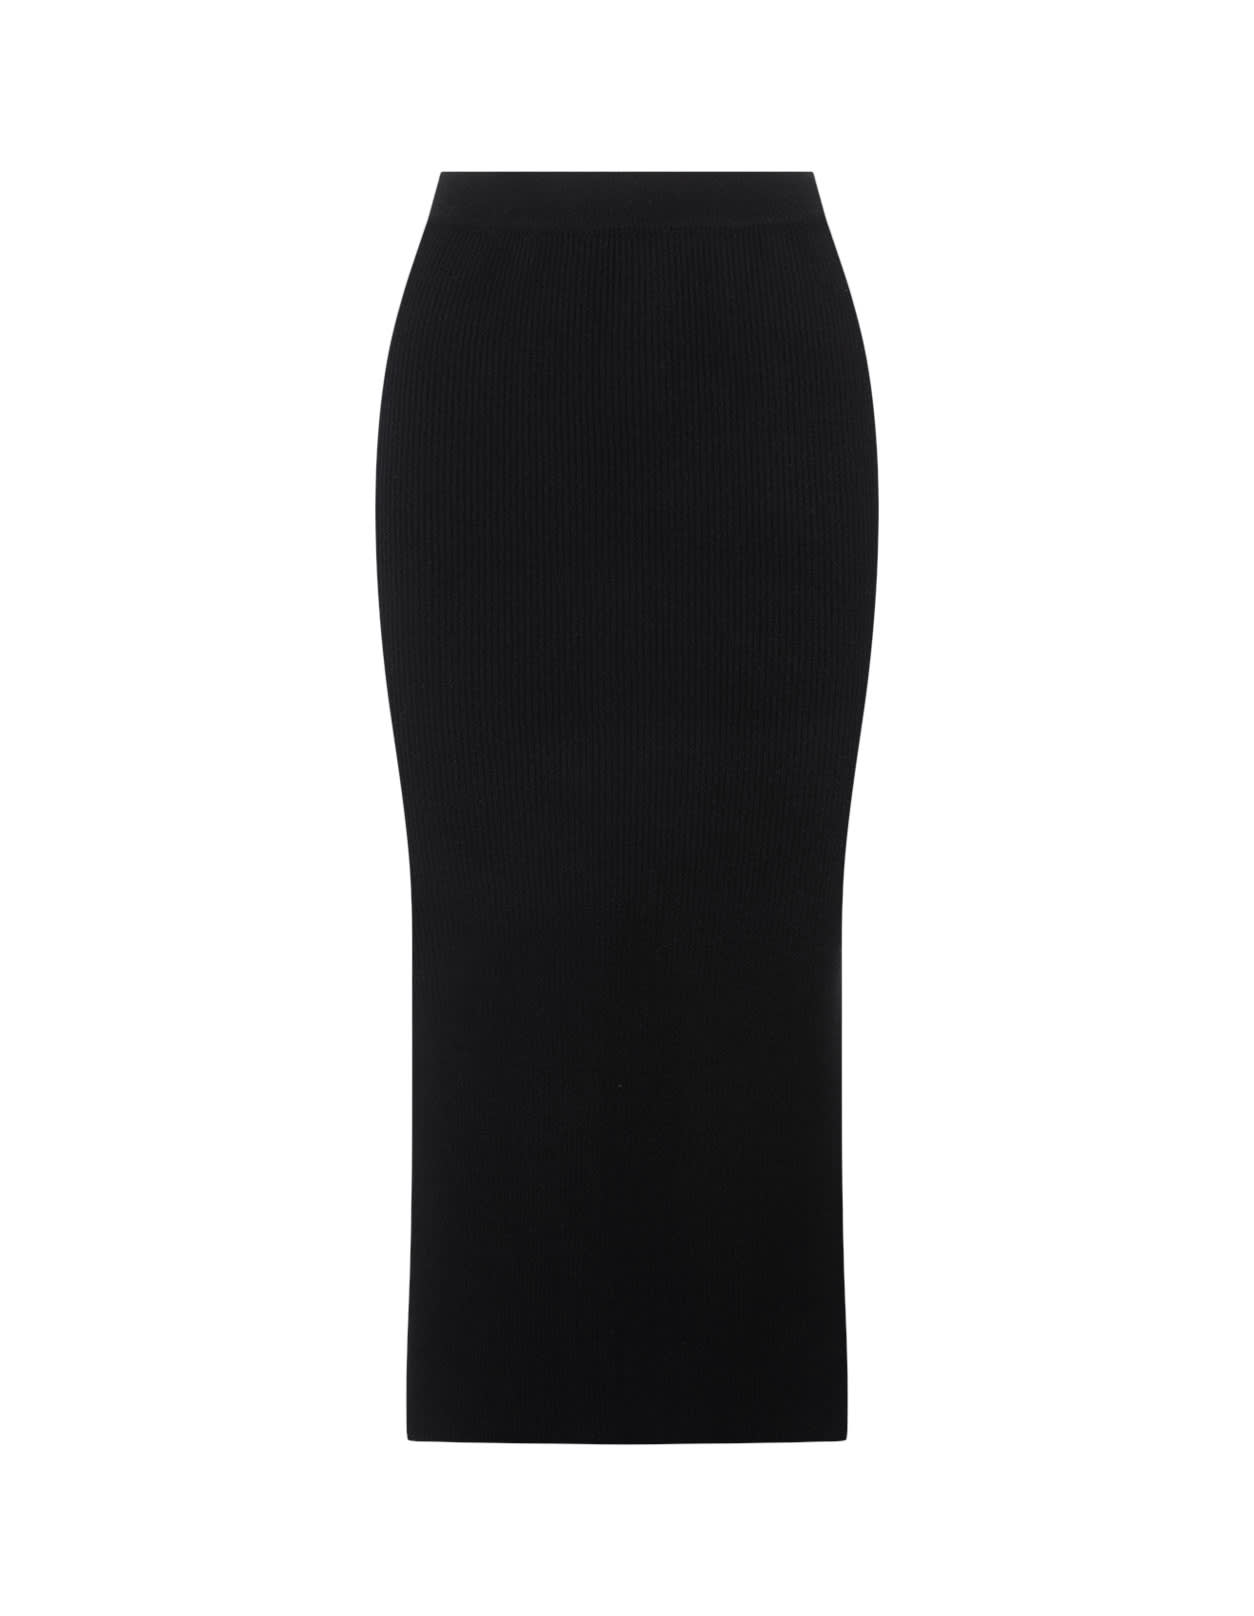 A PAPER KID BLACK KNITTED LONGUETTE SKIRT WITH SLIT